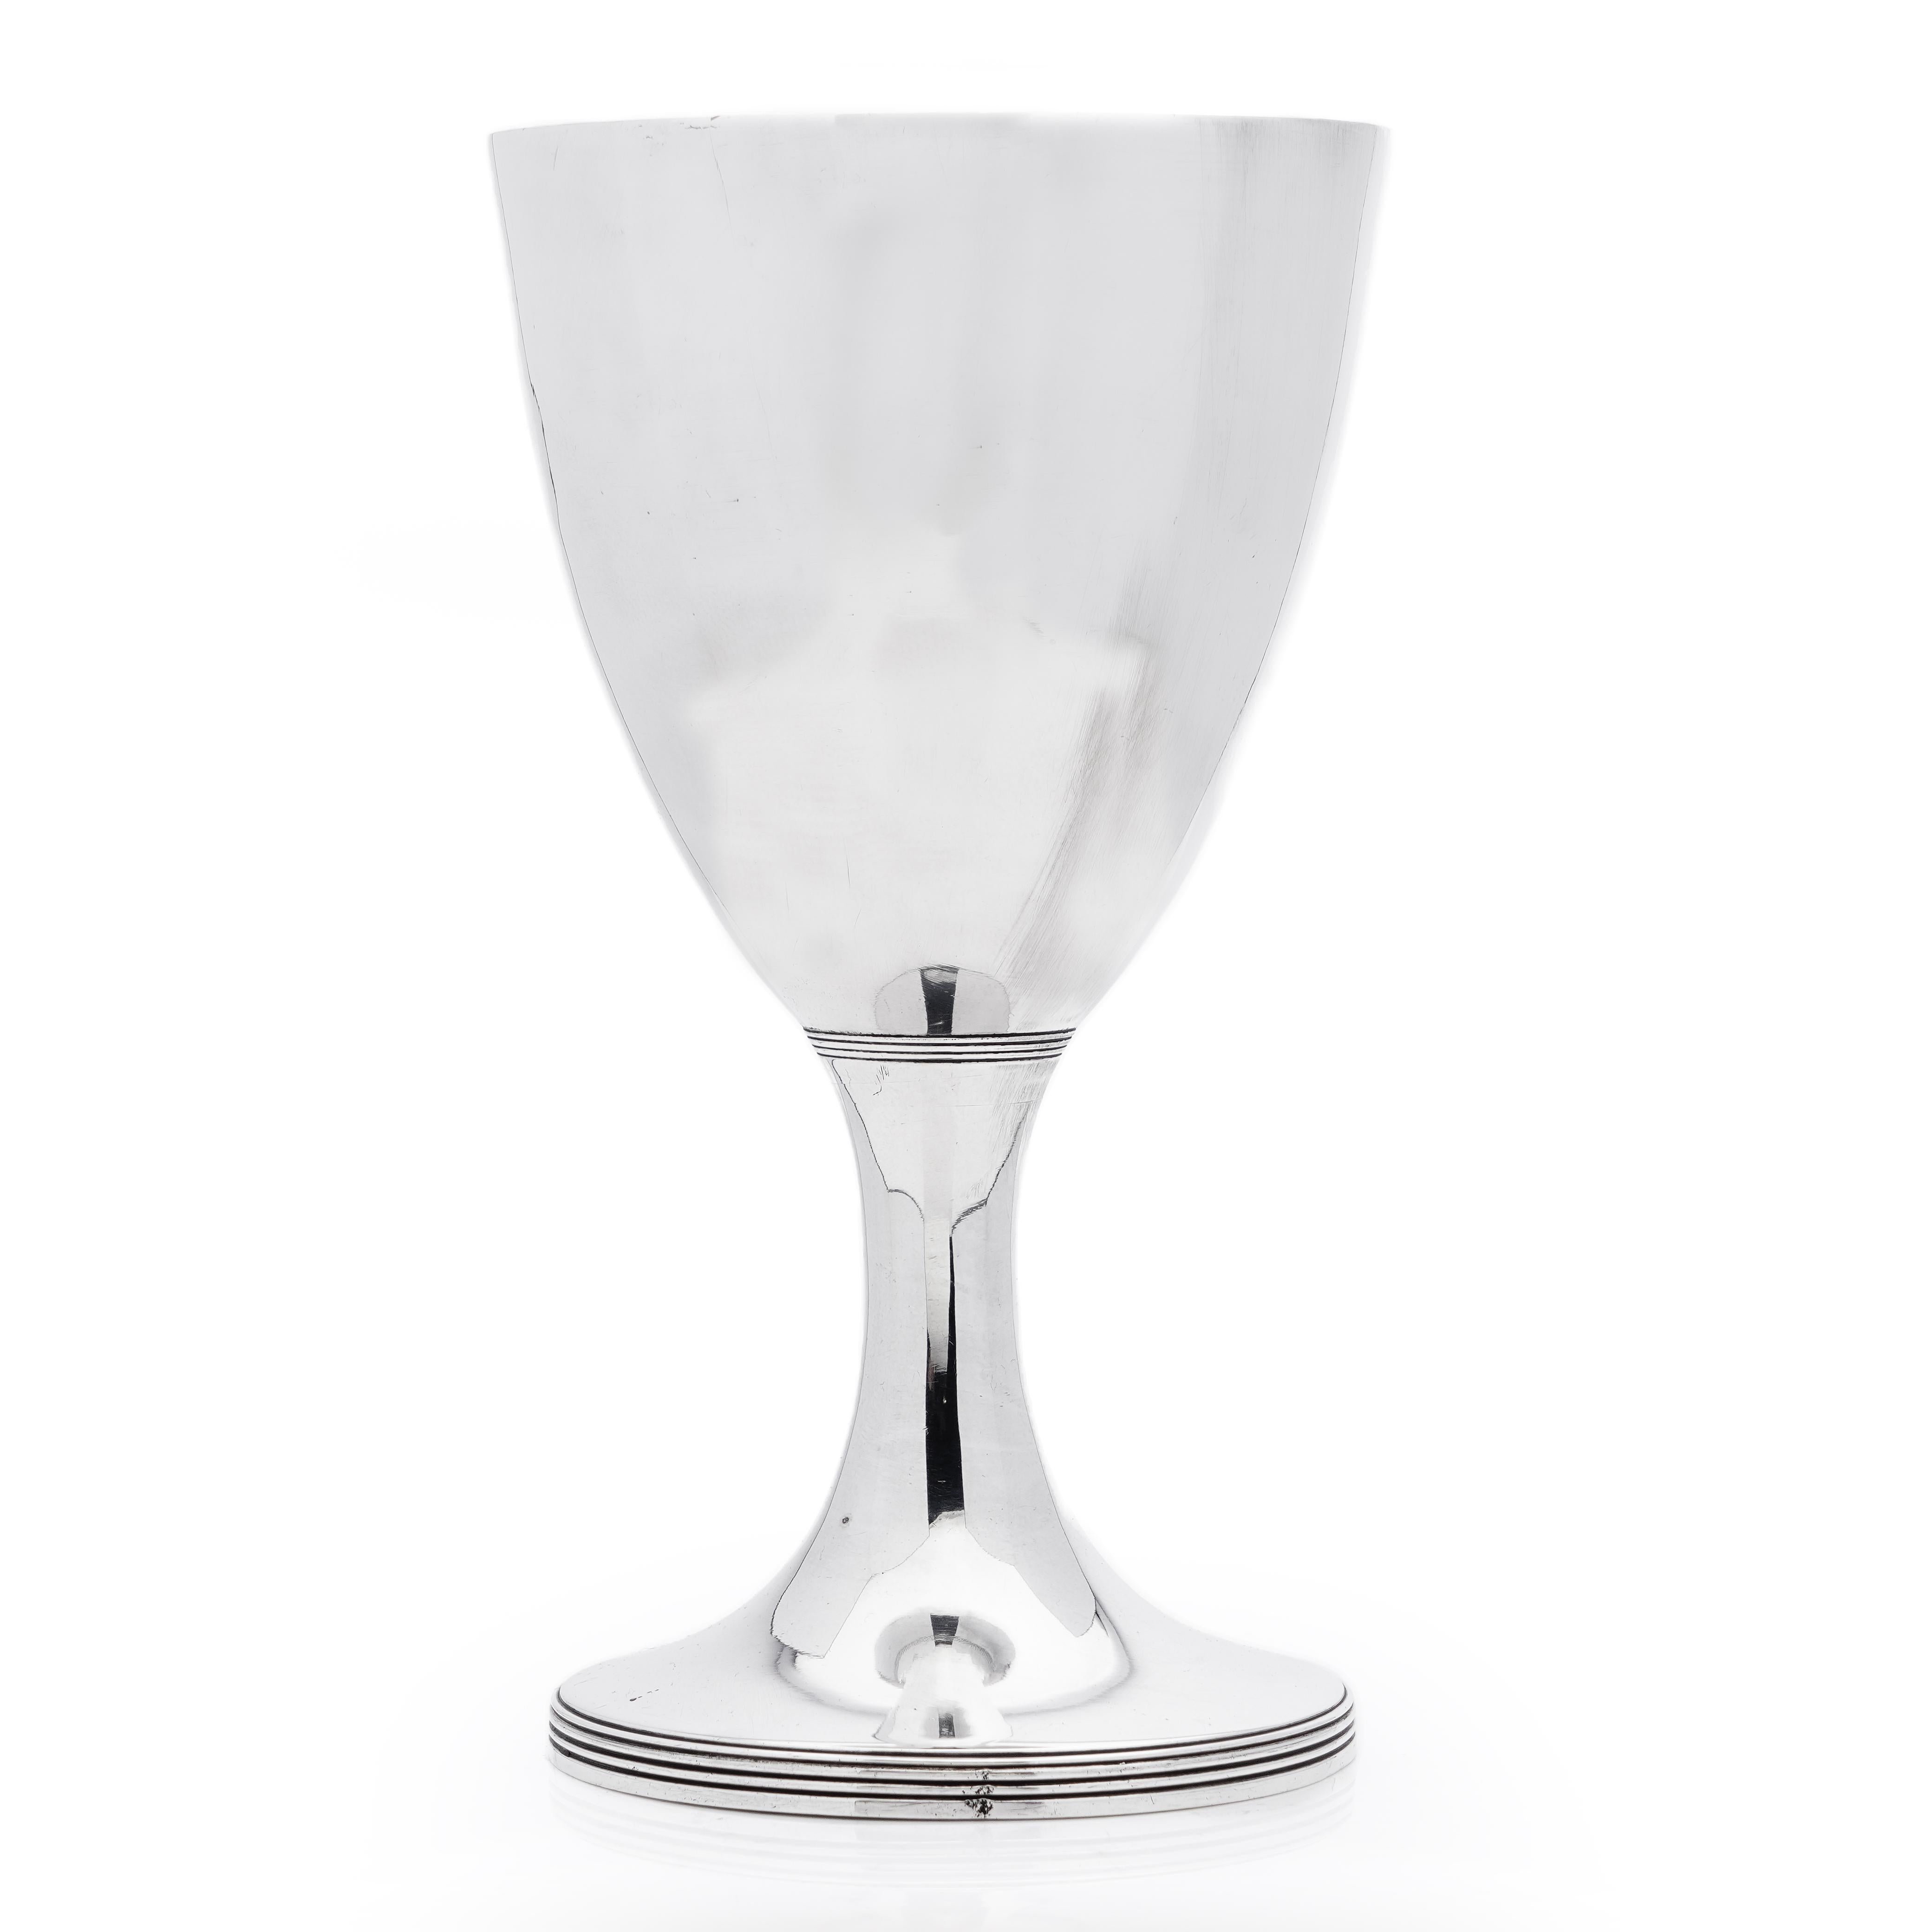 Antique Late 18th Century George III sterling silver large goblet. 
Maker: Samuel Godbehere & Edward Wigan
Made in England, London, 1793
Fully Hallmarked. 

Samuel Godbehere was not apprenticed through the Goldsmiths' Company nor was a Freeman of